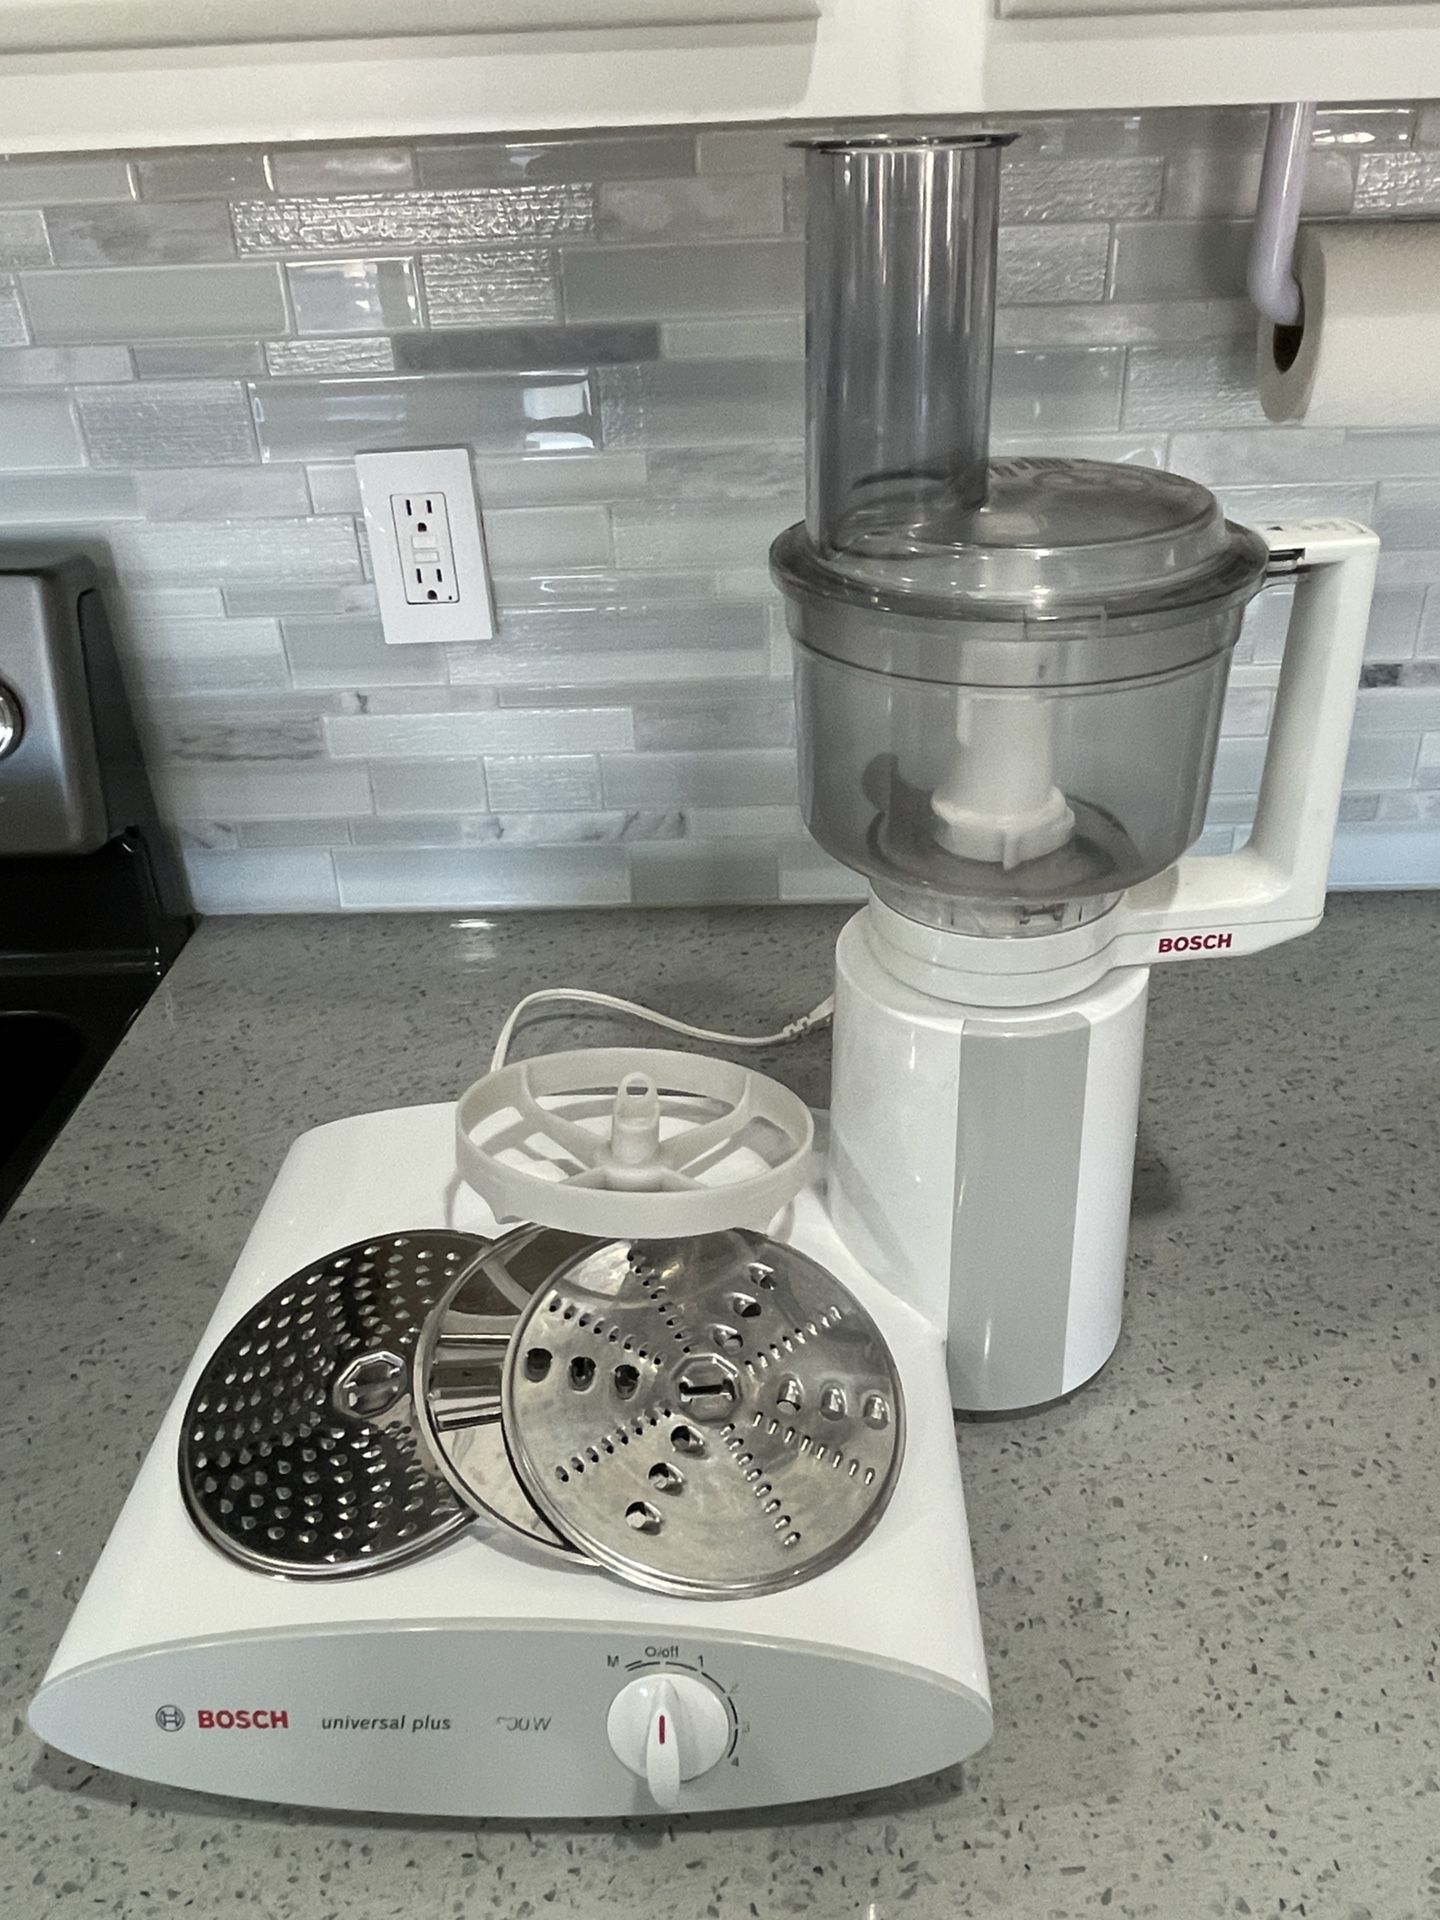 BOSCH UNIVERSAL PLUS MIXER. for Sale in Tacoma, WA - OfferUp